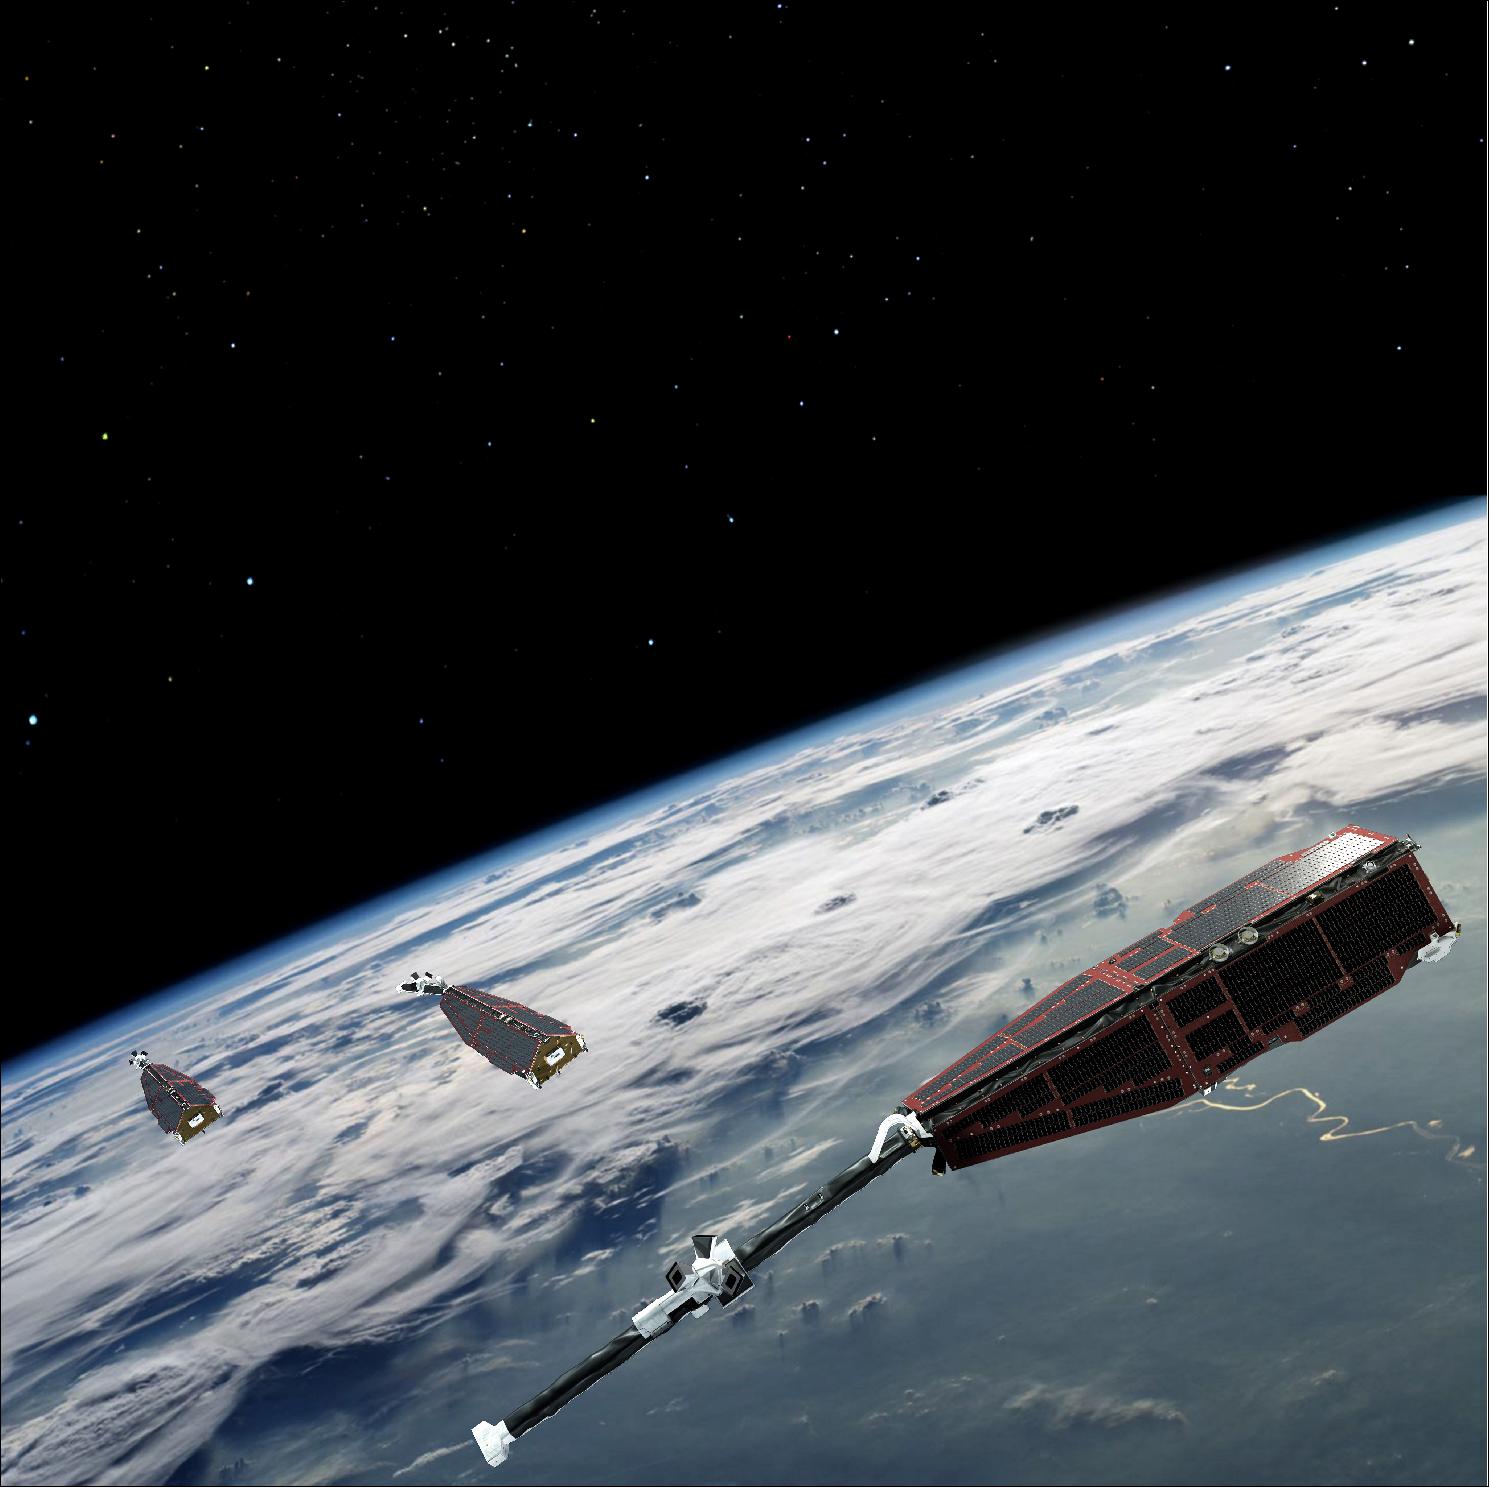 Figure 41: Swarm is ESA's first Earth observation constellation of satellites. The three identical satellites are launched together on one rocket. Two satellites orbit almost side-by-side at the same altitude – initially at about 460 km, descending to around 300 km over the lifetime of the mission. The third satellite is in a higher orbit of 530 km and at a slightly different inclination. The satellites’ orbits drift, resulting in the upper satellite crossing the path of the lower two at an angle of 90º in the third year of operations. -The different orbits along with satellites’ various instruments optimize the sampling in space and time, distinguishing between the effects of different sources and strengths of magnetism (image credit: ESA/AOES Medialab)